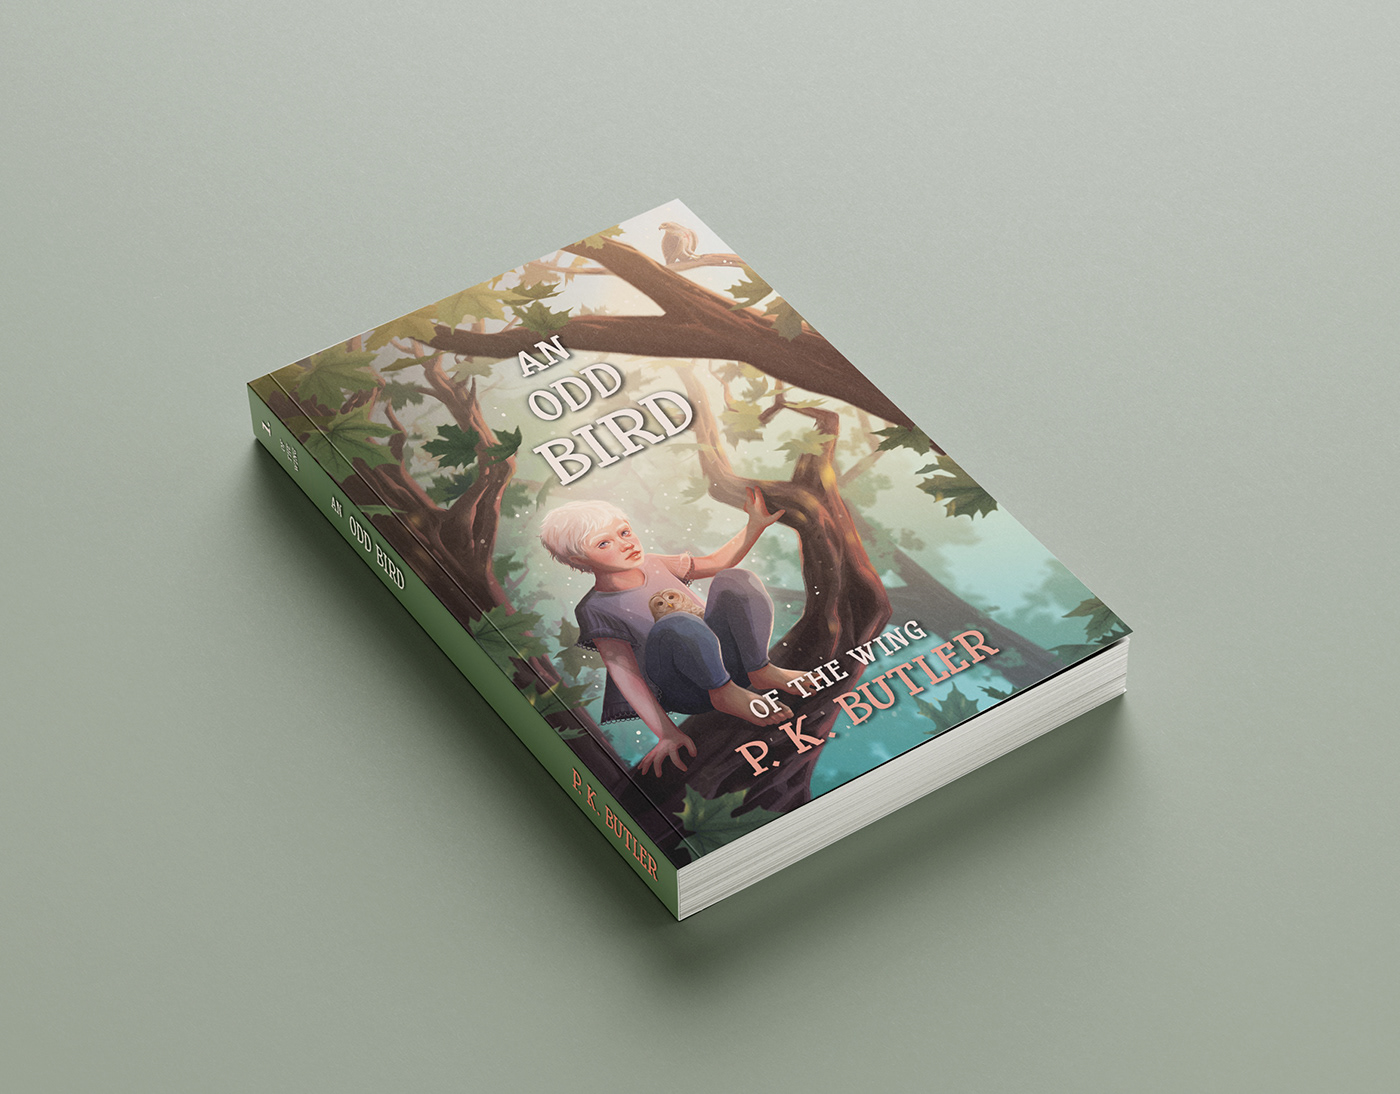 Book cover design for self publishing author for print on demand. children's book story novel
